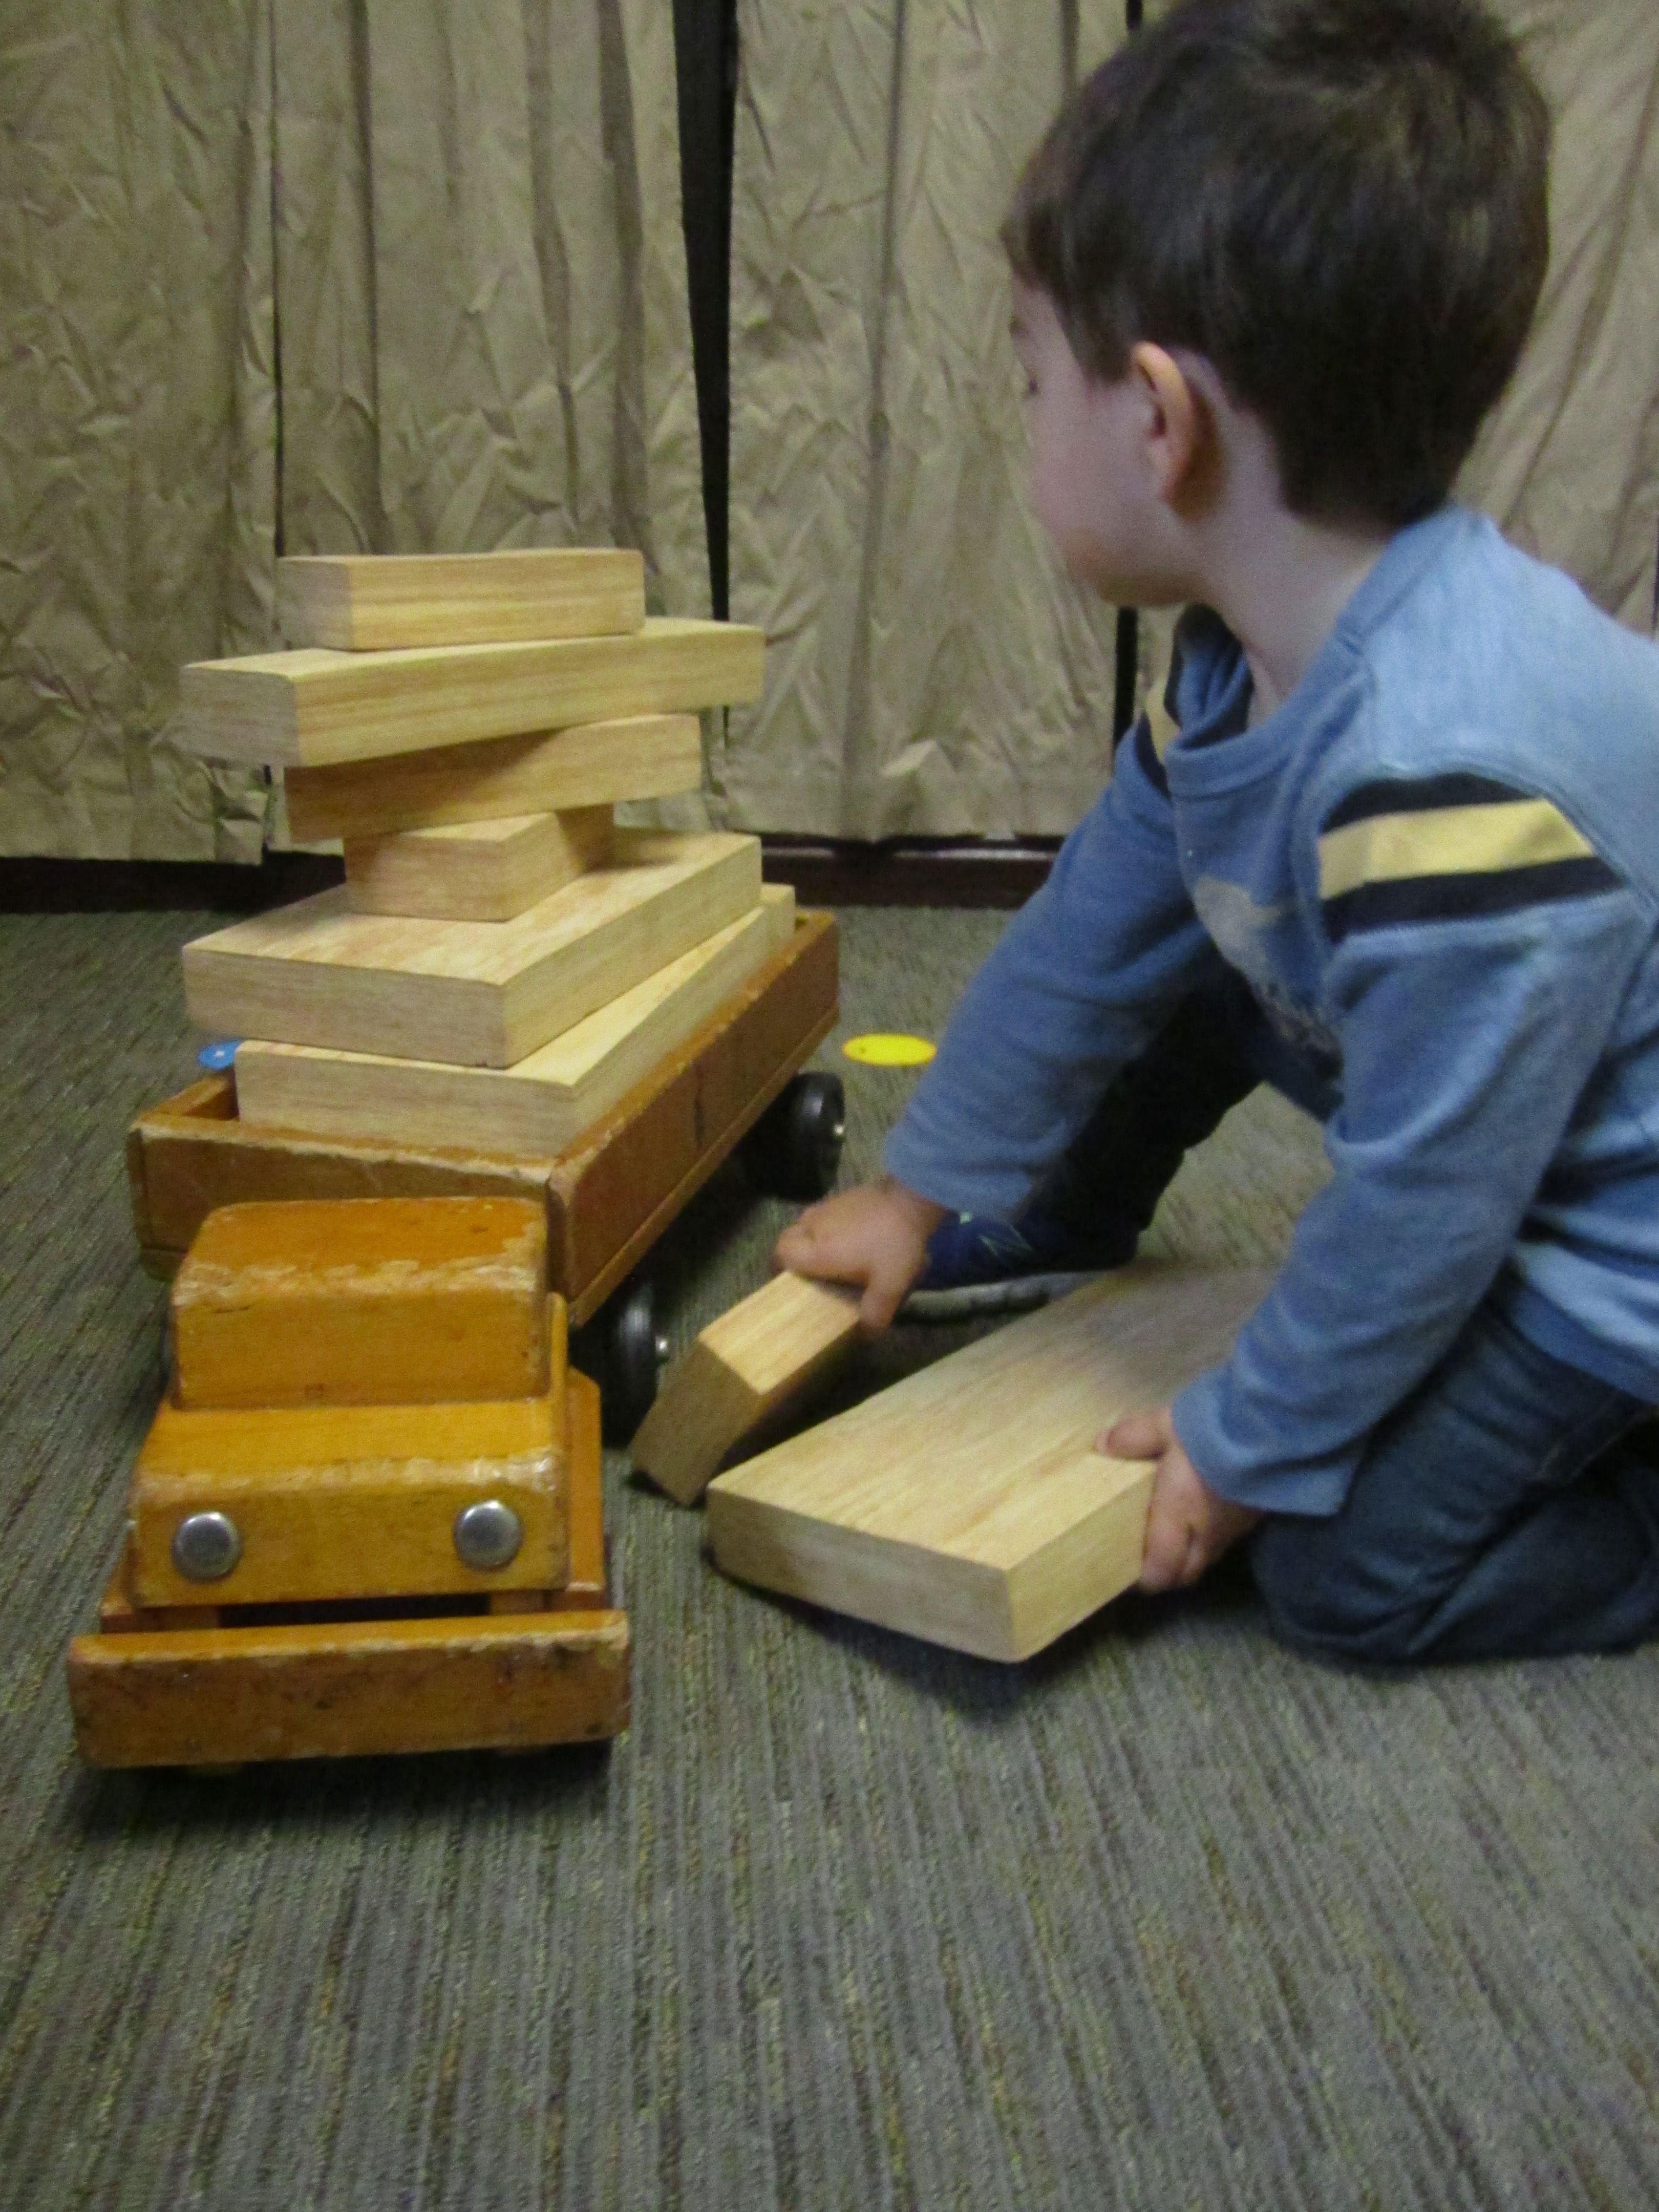 Child stacking wooden unit blocks on top of a wooden truck for transport in a classroom.